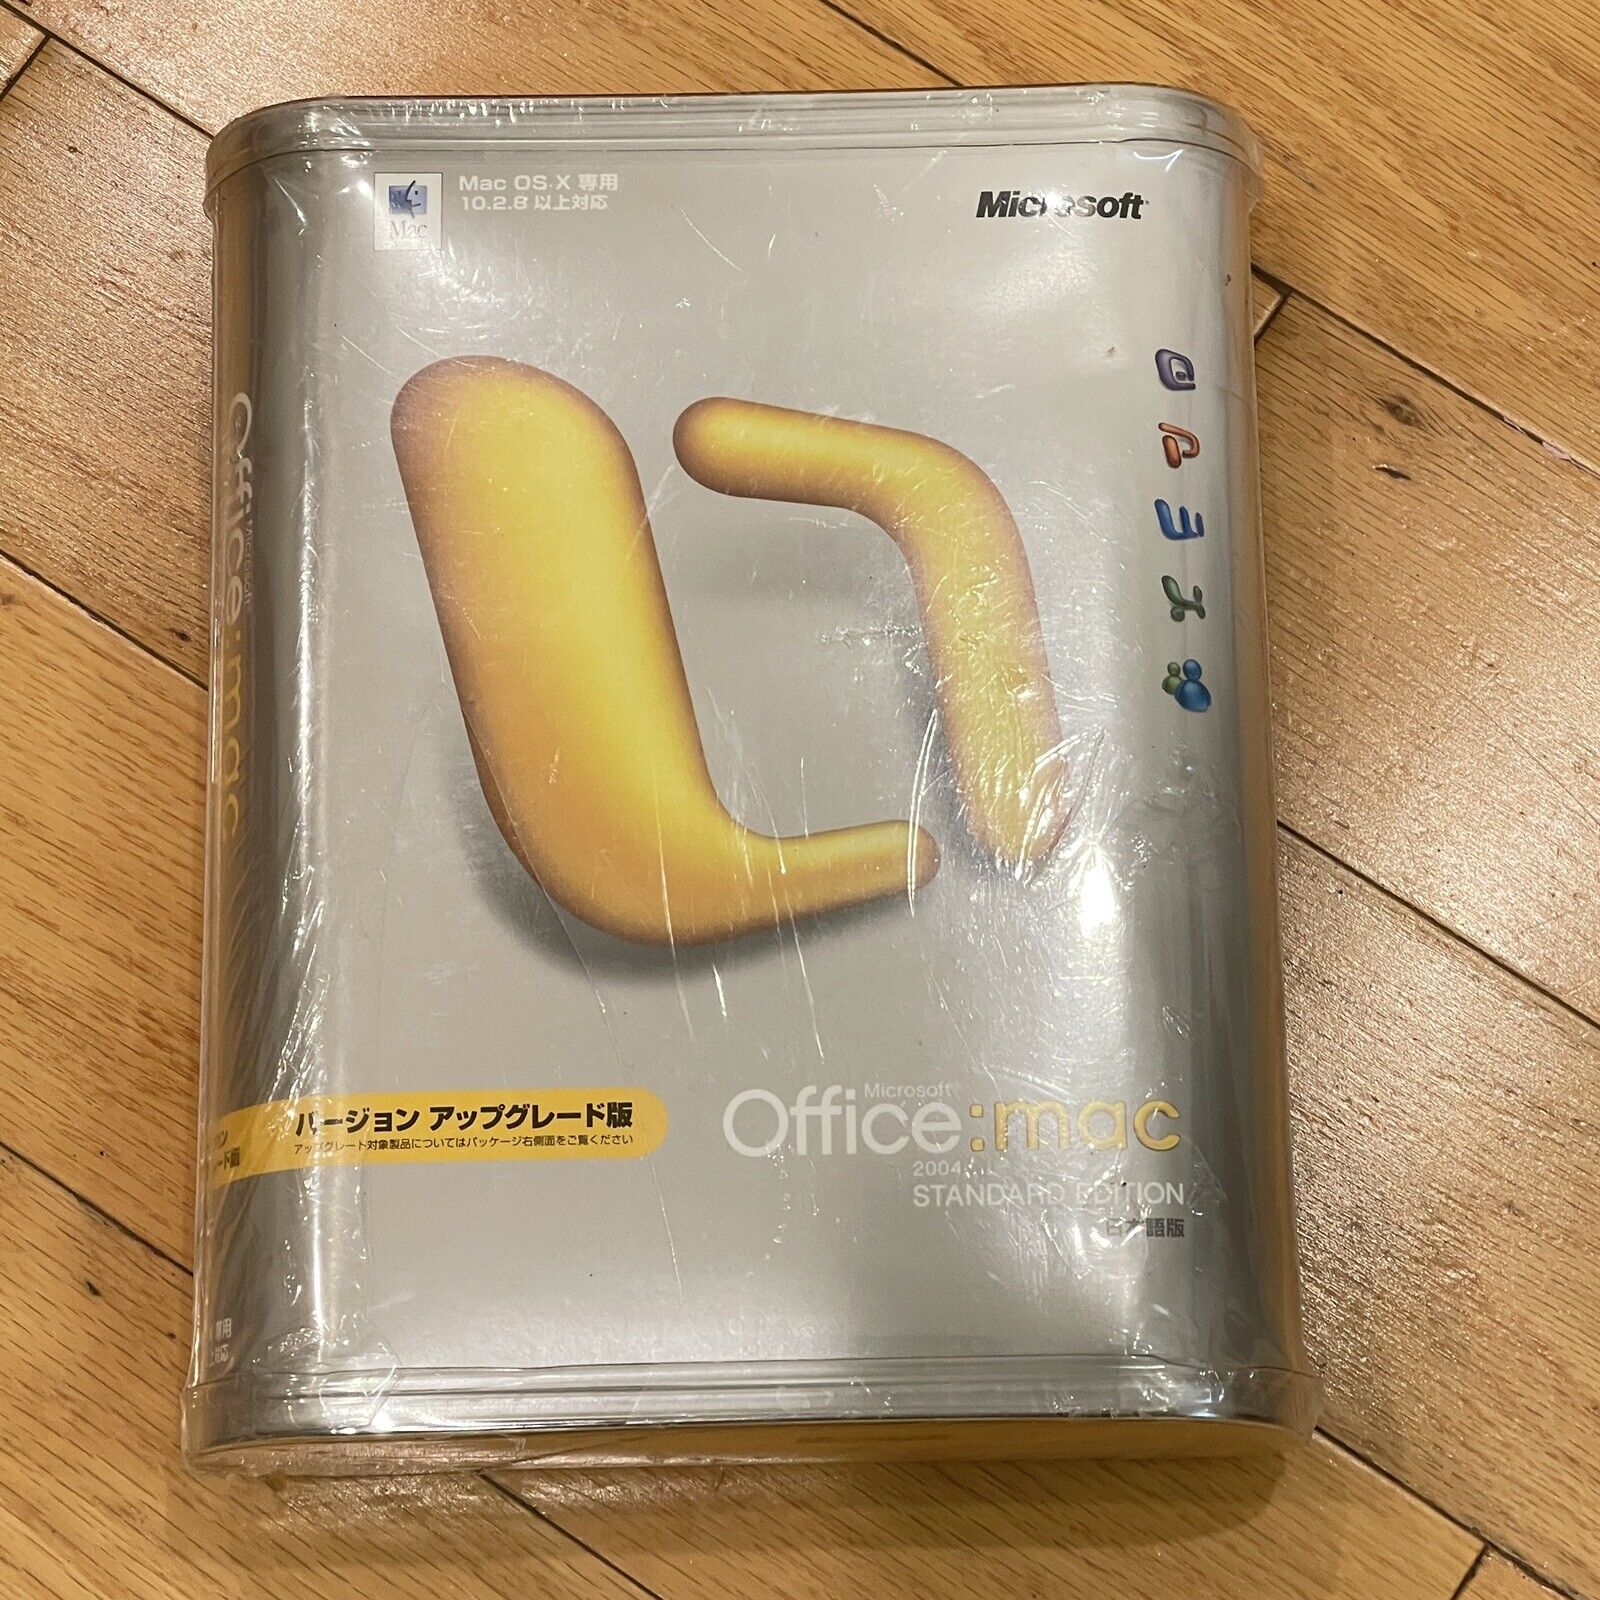 Microsoft Office Mac 2004 incl. Product Key Standard For One Mac Japanese Ed New